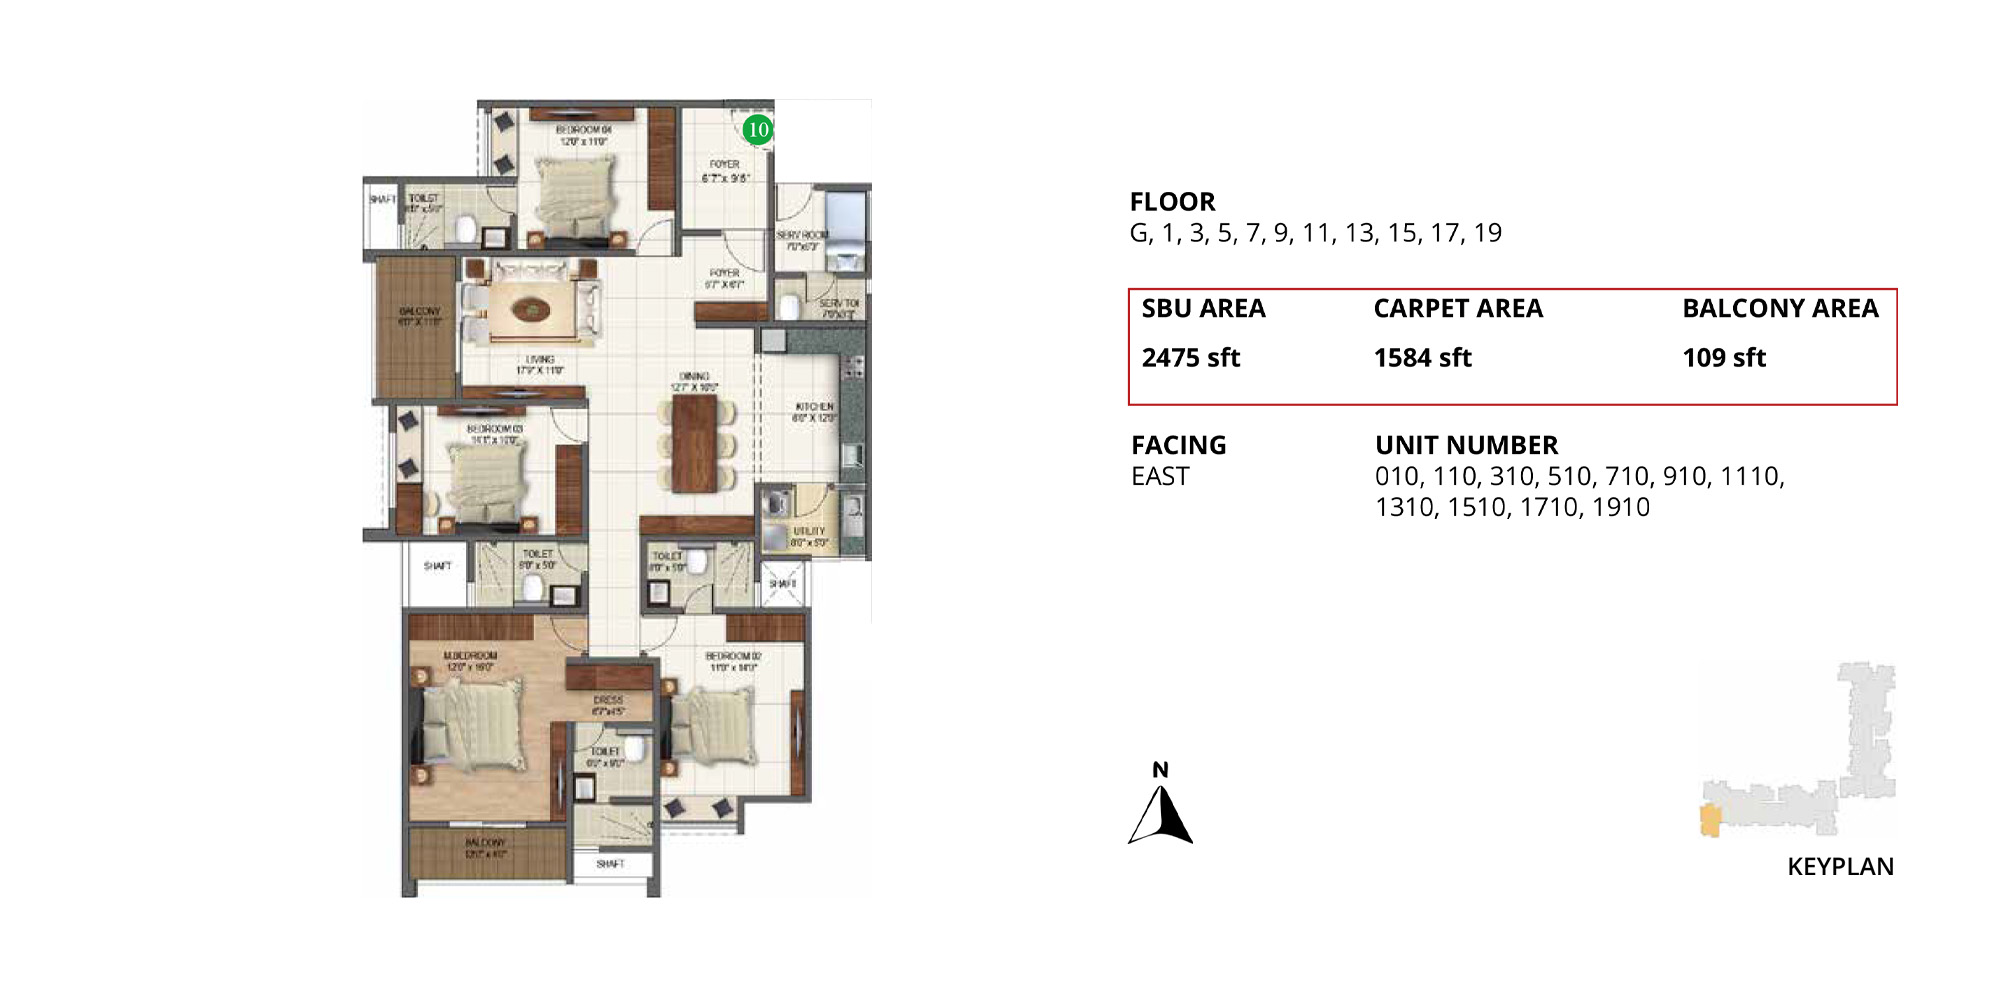 4 bhk Apartment for sale in whitefield